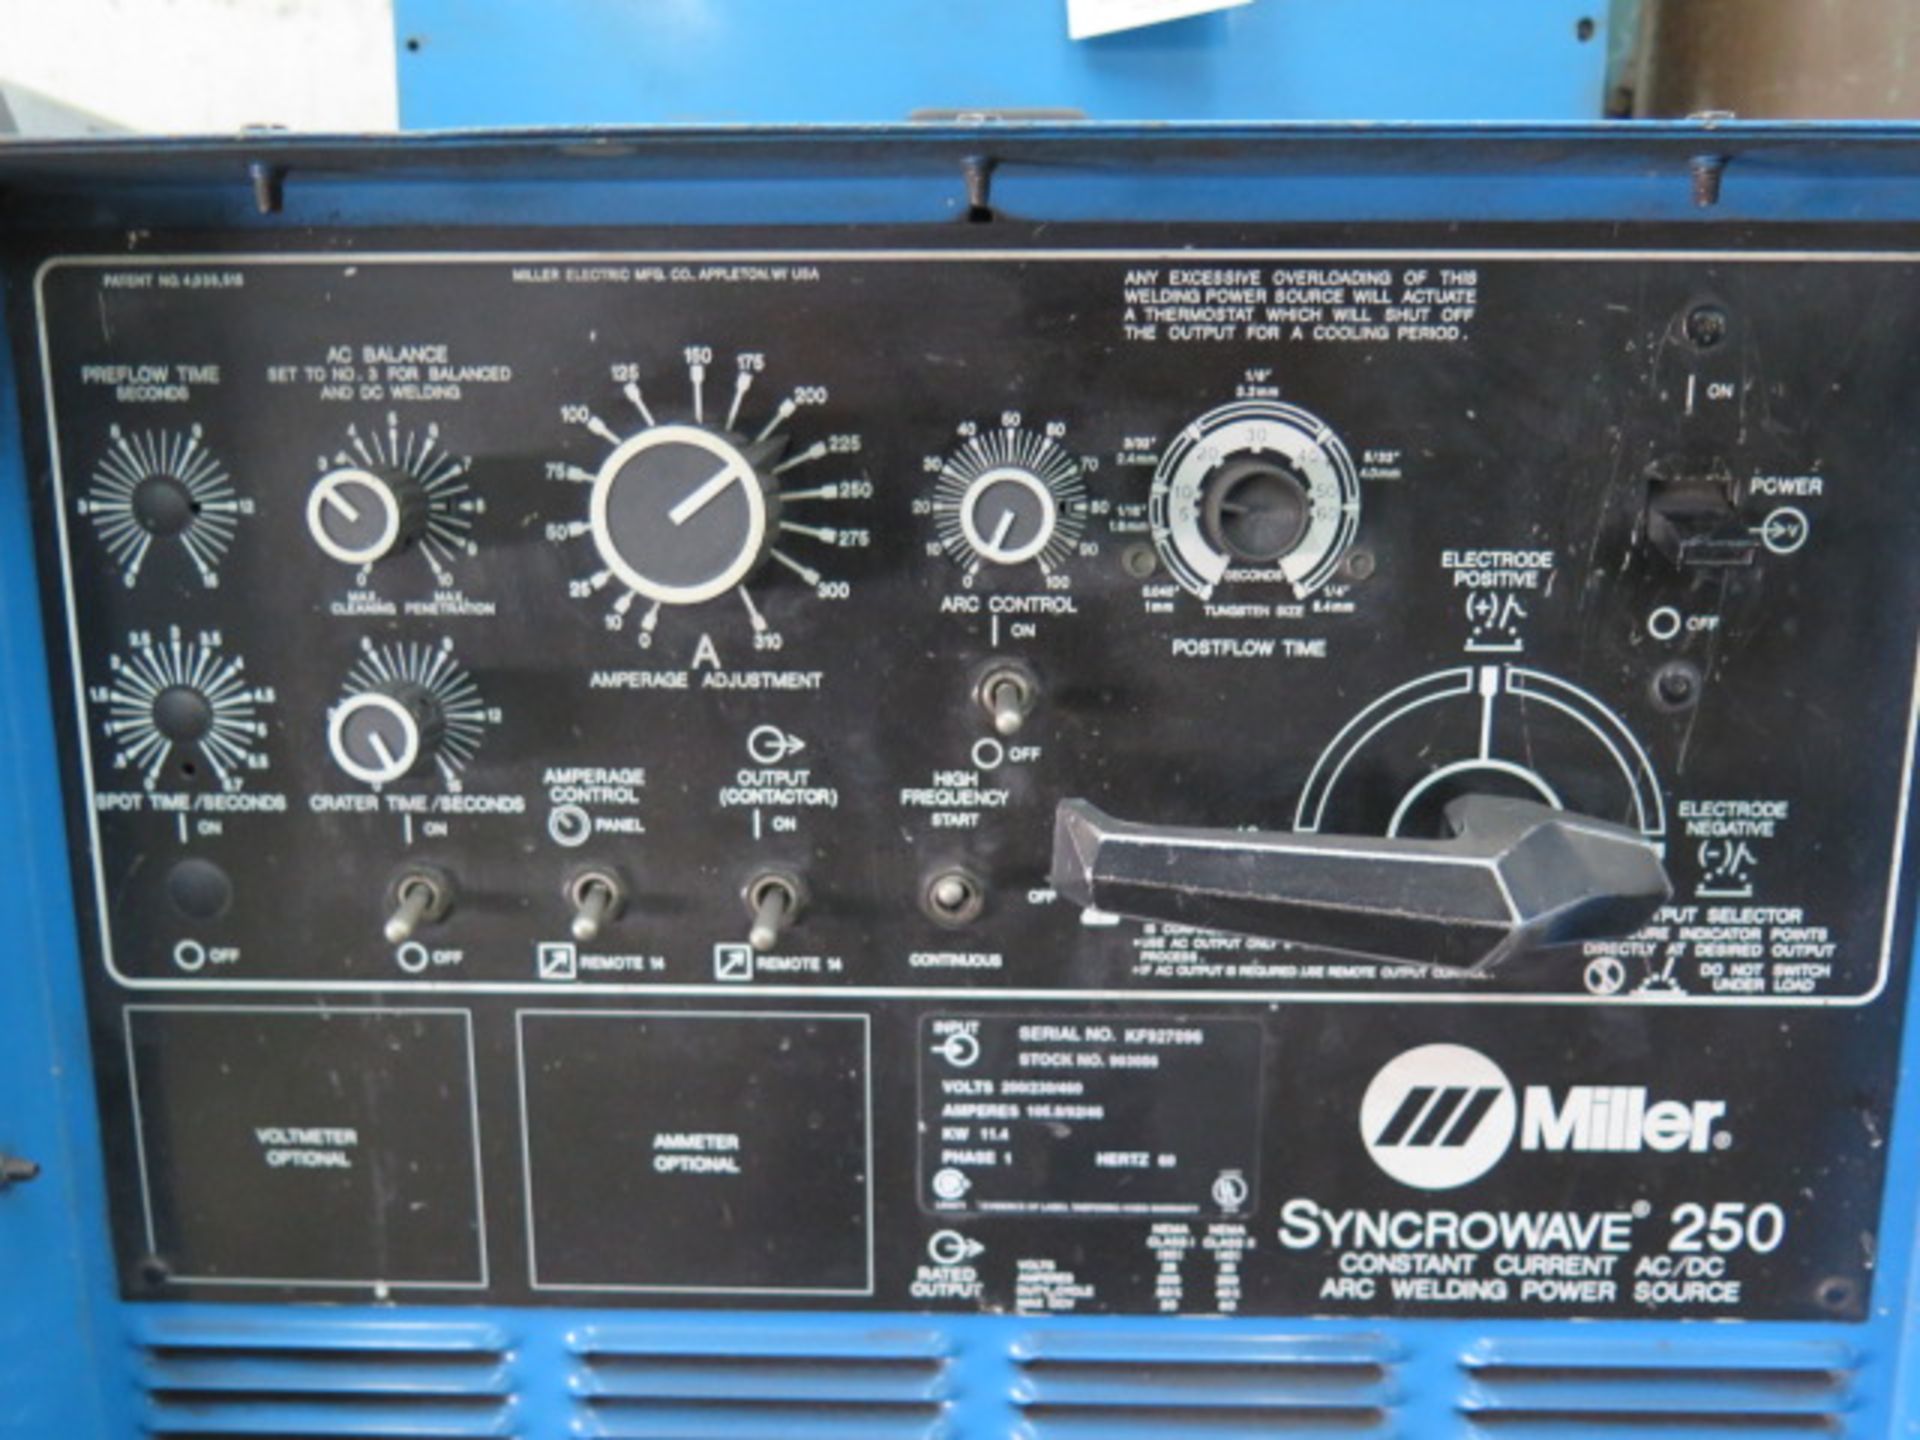 Miller Syncrowave 250 CC-AC/DC Arc Welding Power Source w/ Miller Radiator-1A Cooling, SOLD AS IS - Image 6 of 13